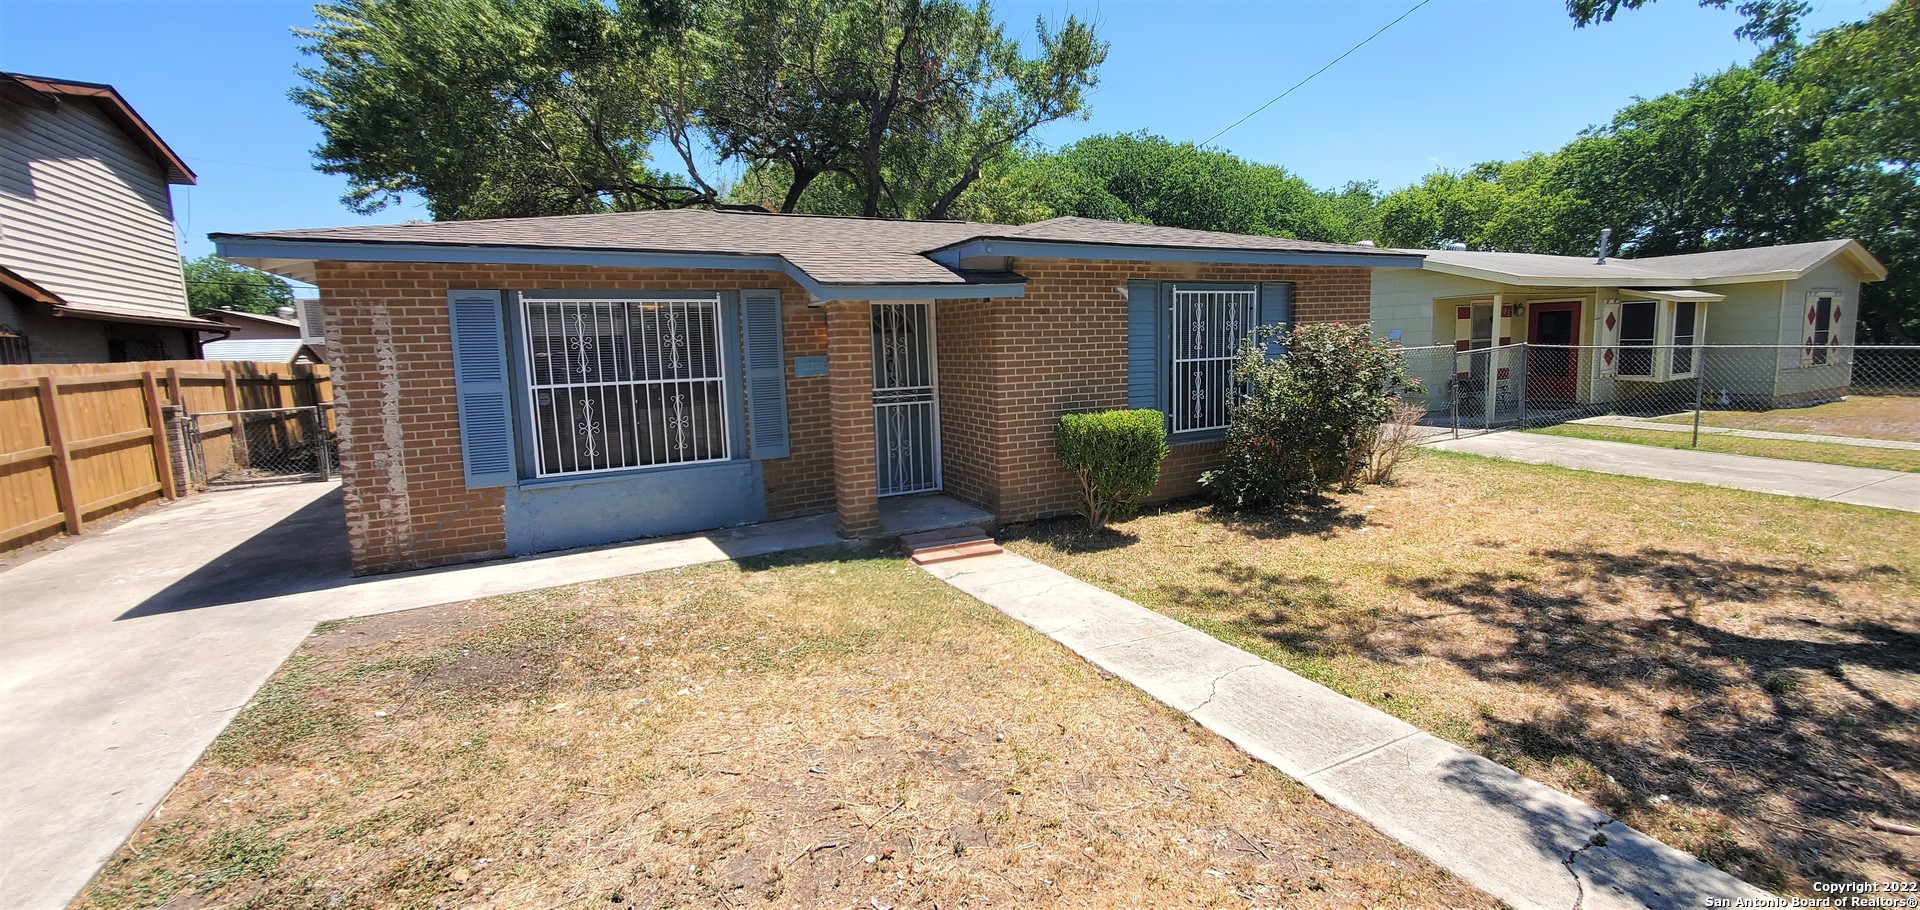 Owner Finance - Dueno a Dueno - 2bed/1bath - Separate Laundry Room - Large yard w mature trees - $25,000 down payment & $1,400 per month (includes property taxes & insurance). New 30yr Roof - New Flooring - New Paint - Cement Foundation - No bank qualifying needed for financing. Call for more info. ITIN ok. Hablamos Espanol.